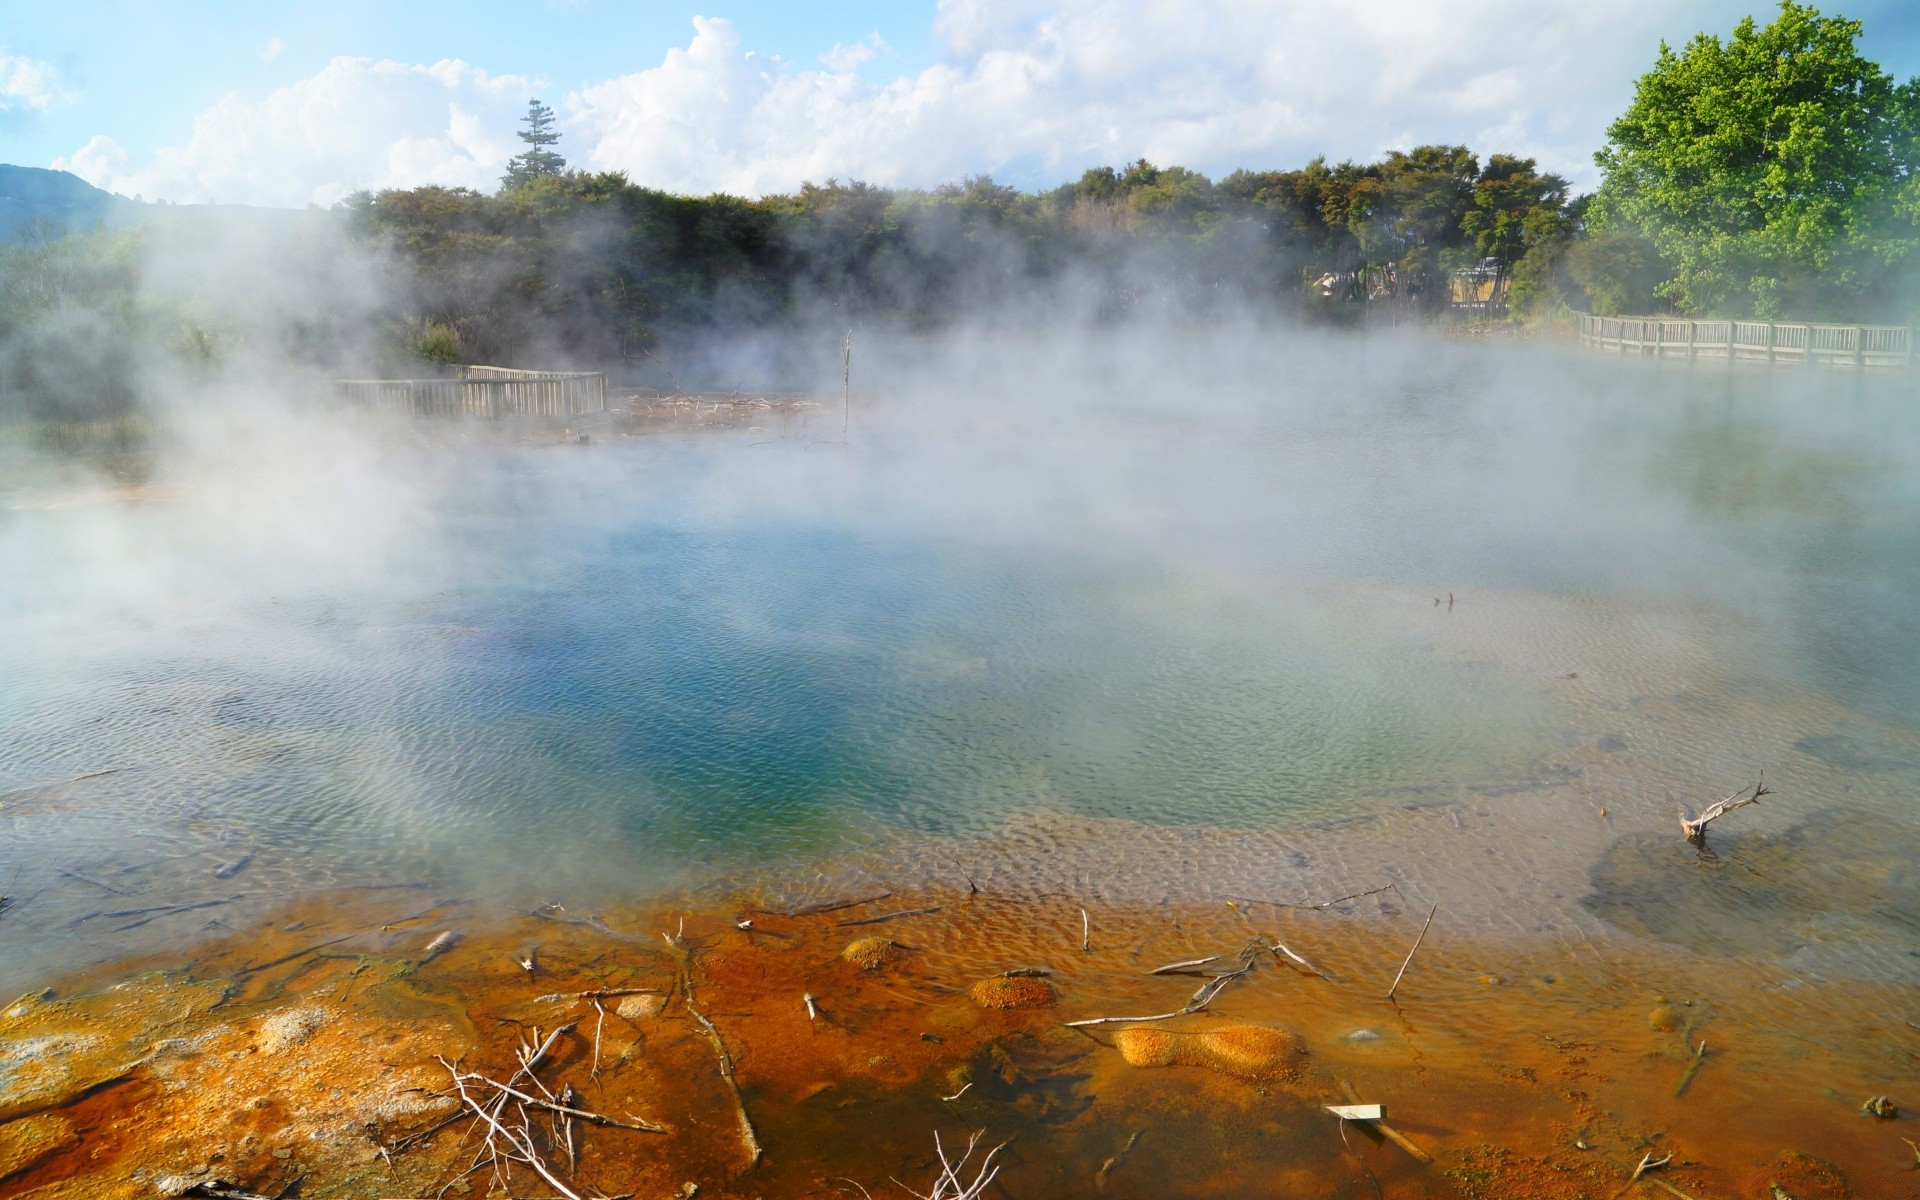 australia and oceania steam hot spring water geyser mist eruption landscape fog smoke volcano outdoors lake sulfur boiling thermal hot travel nature rainbow